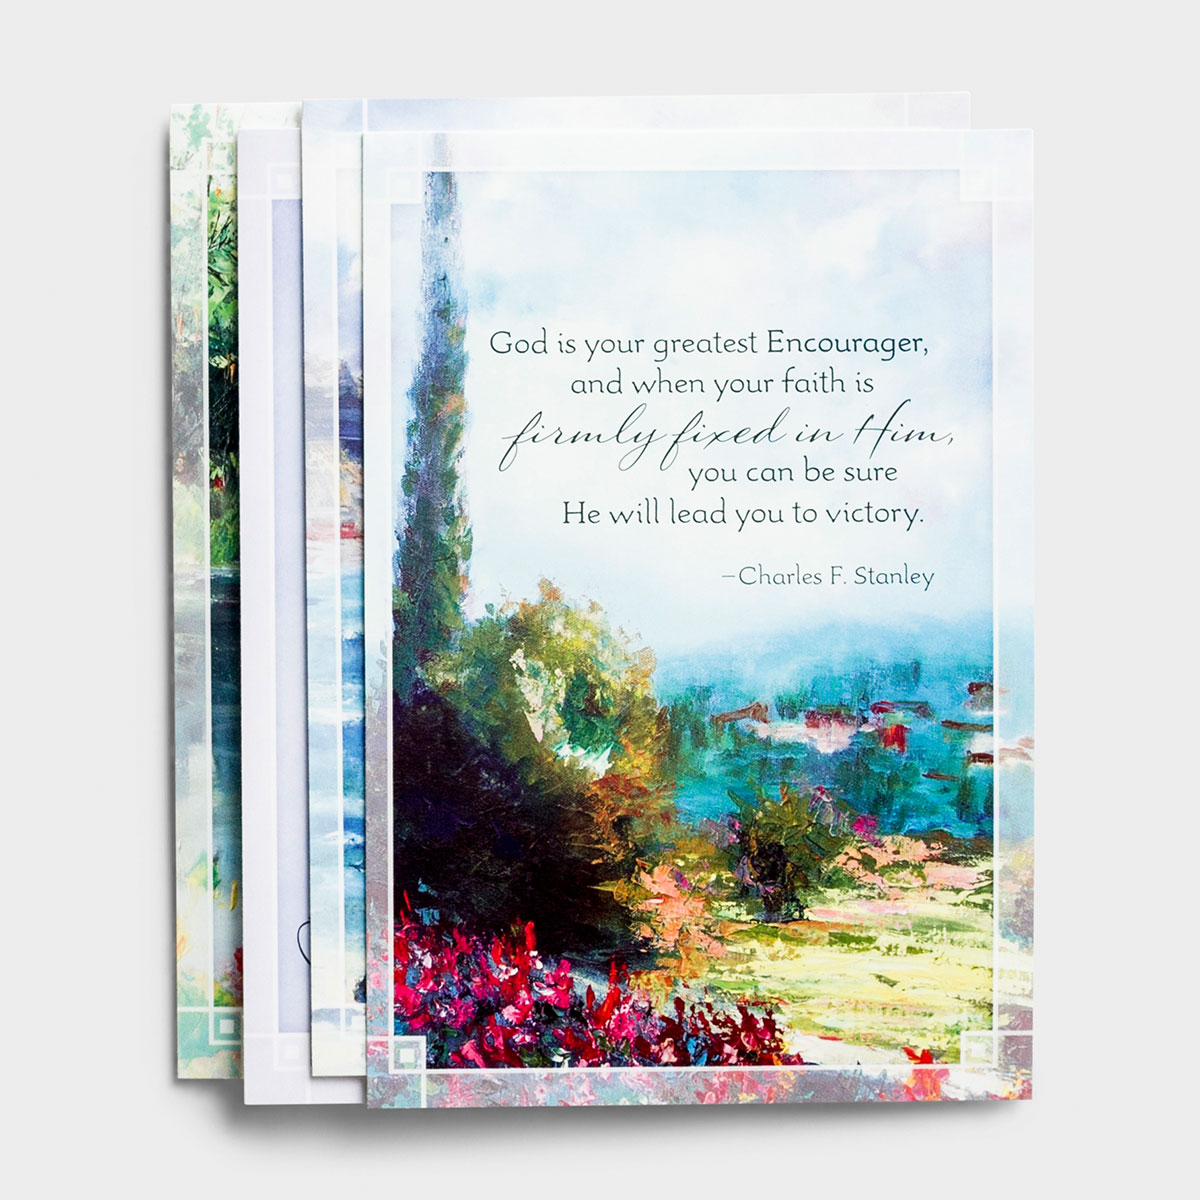 Charles F. Stanley - Encouragement - 12 Boxed Cards | Free Delivery when you spend £10 @ Eden.co.uk